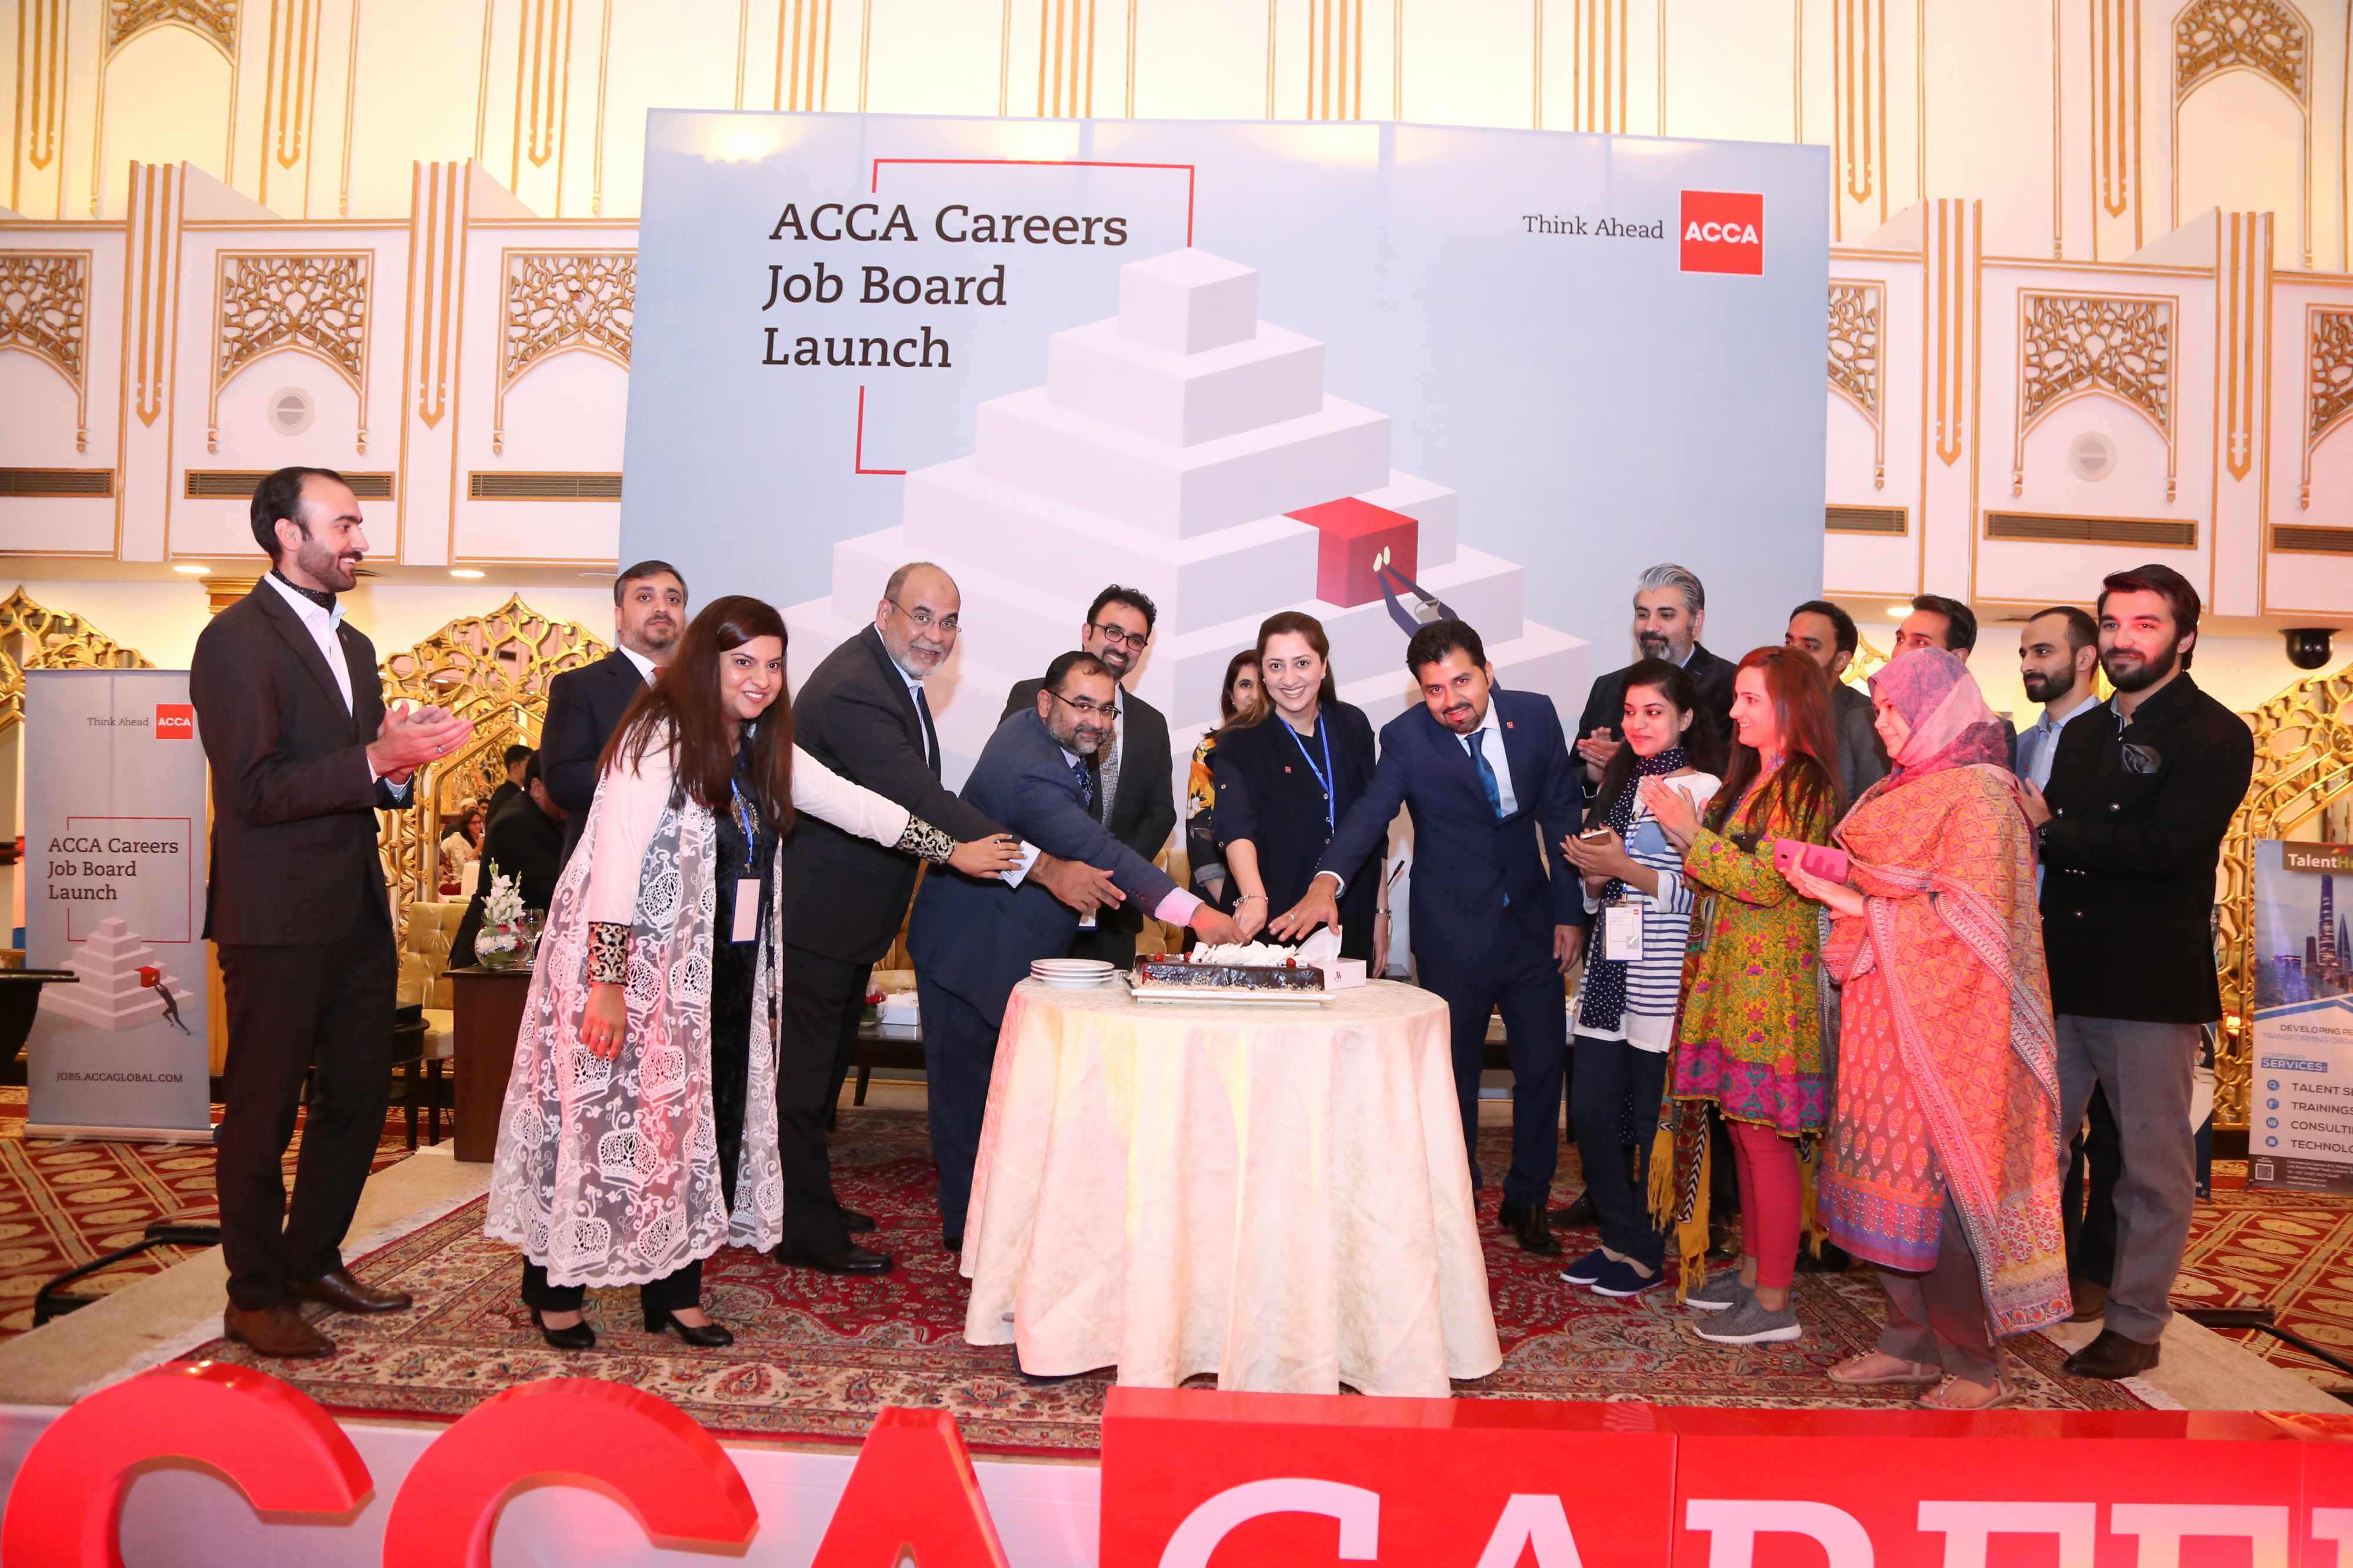 ACCA launches the ACCA Careers Job Board